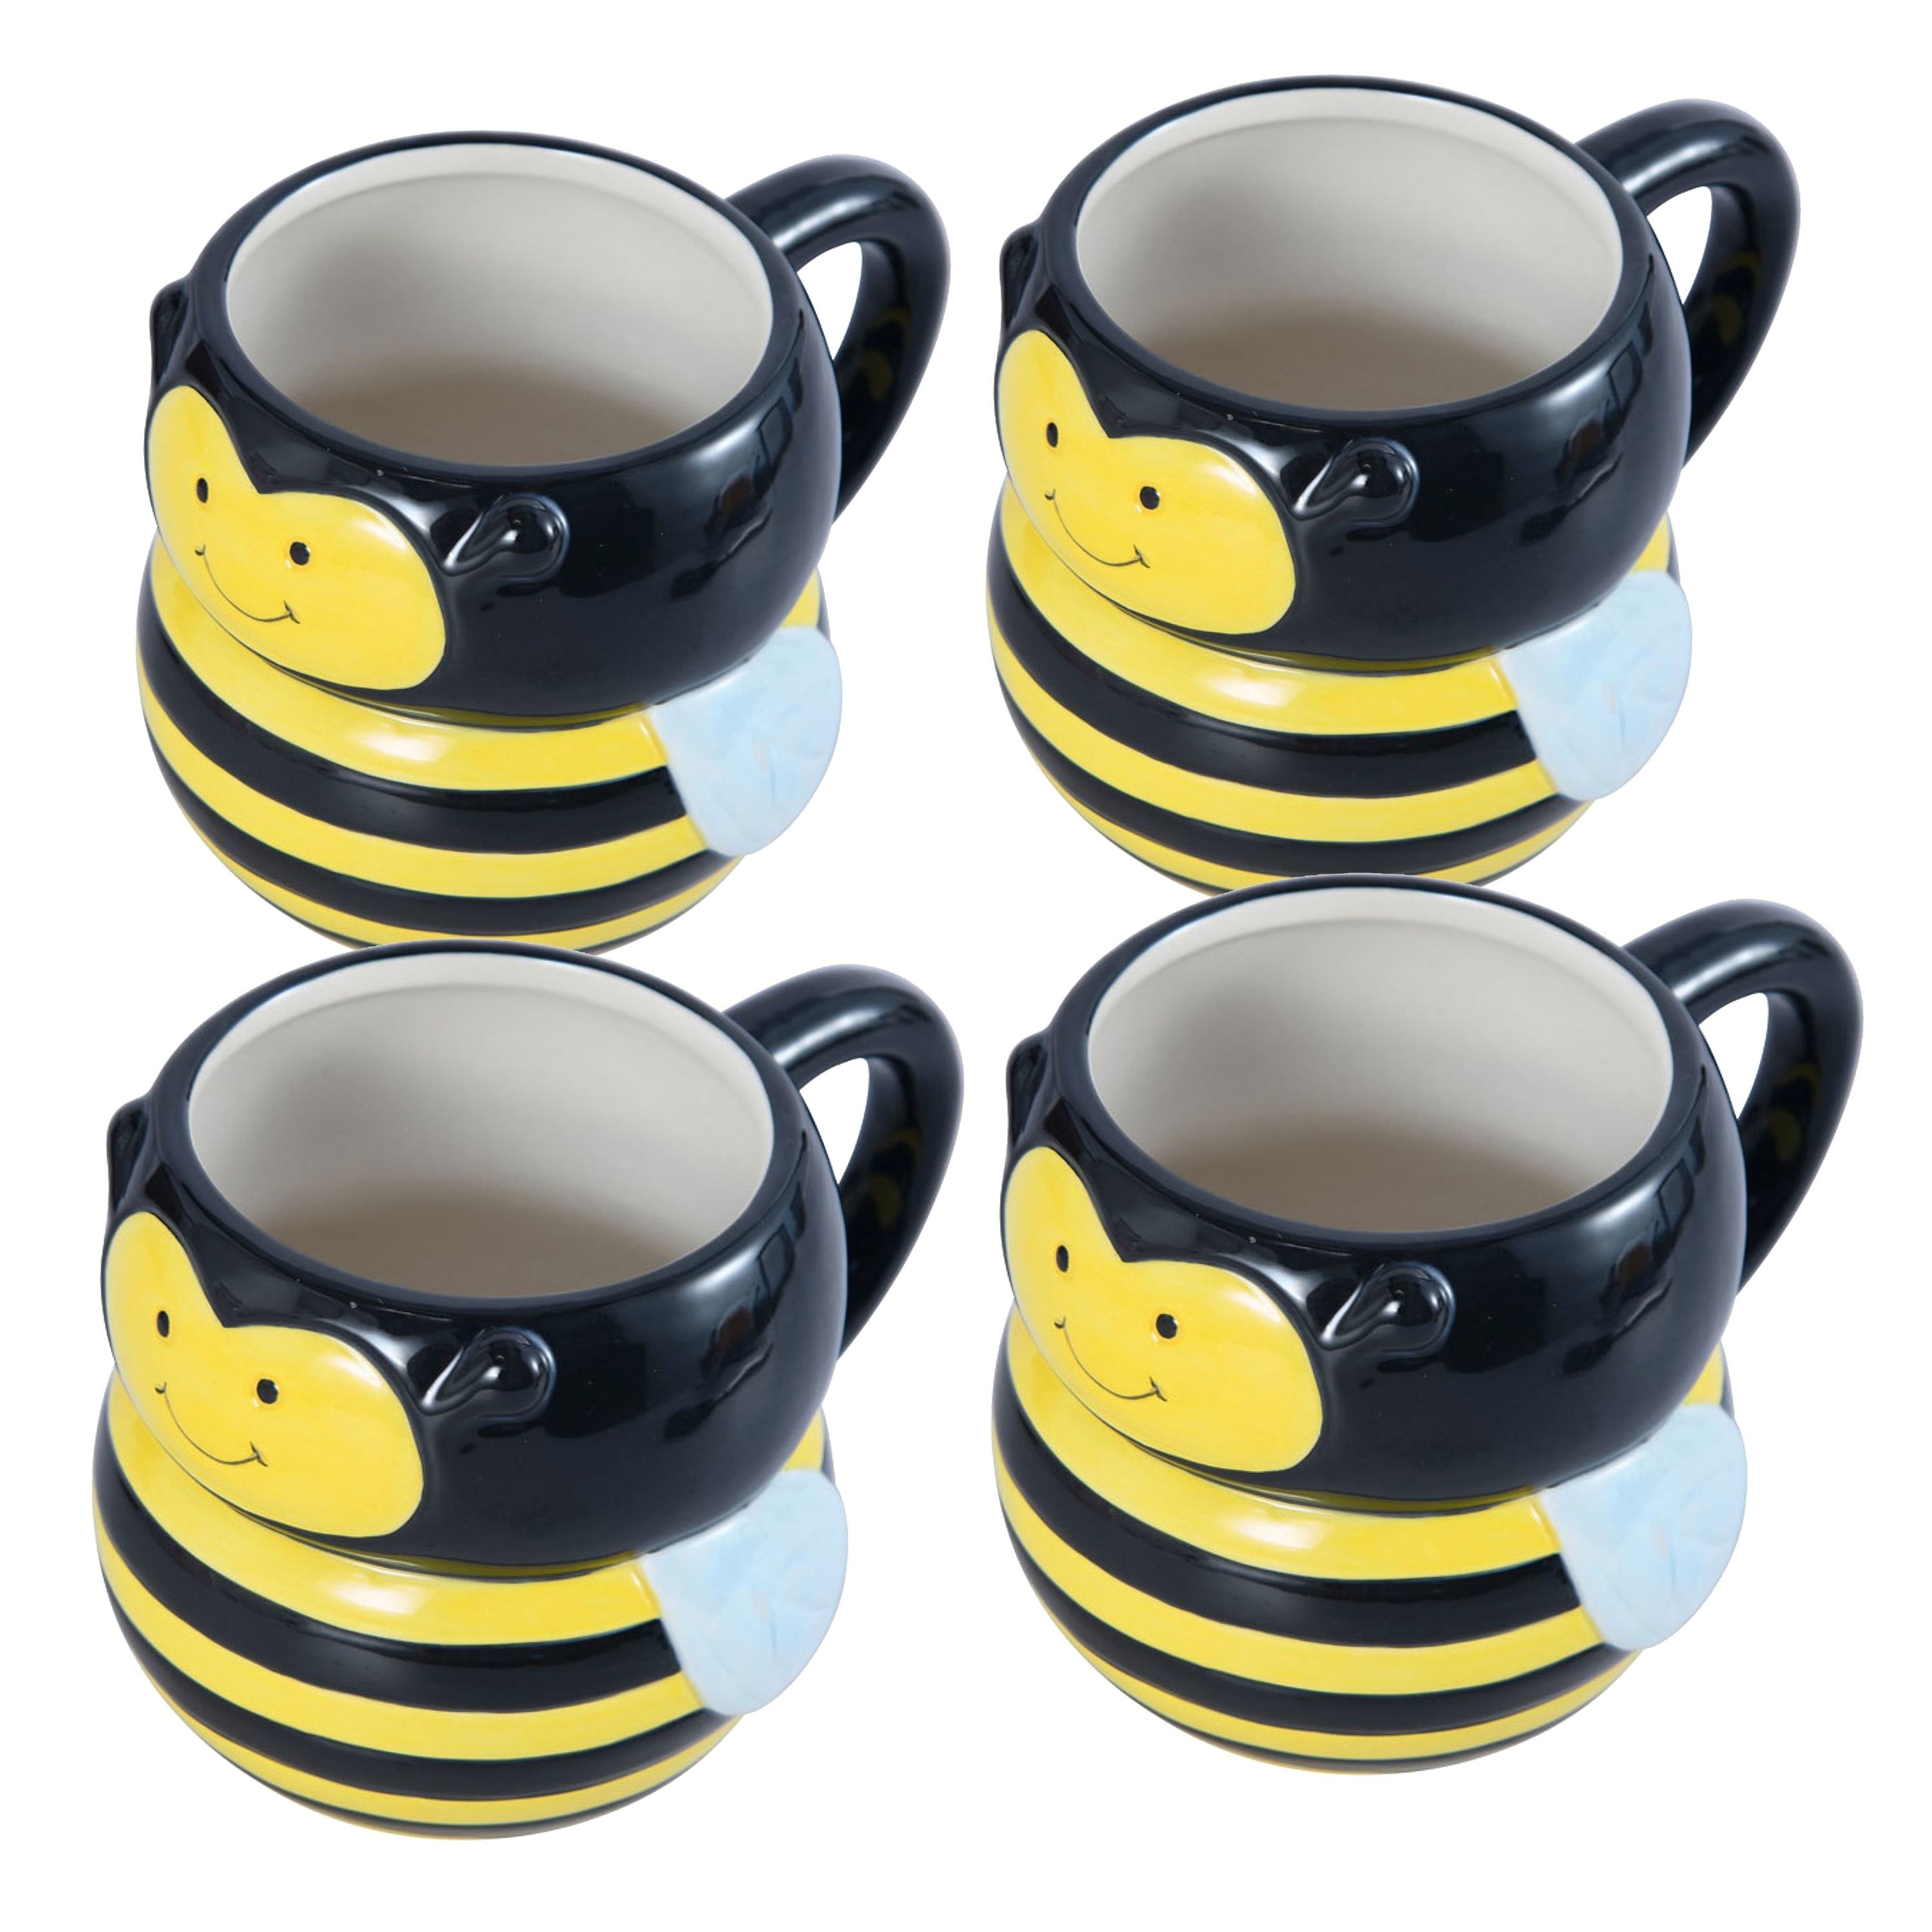 A set of black and yellow animated bee mugs